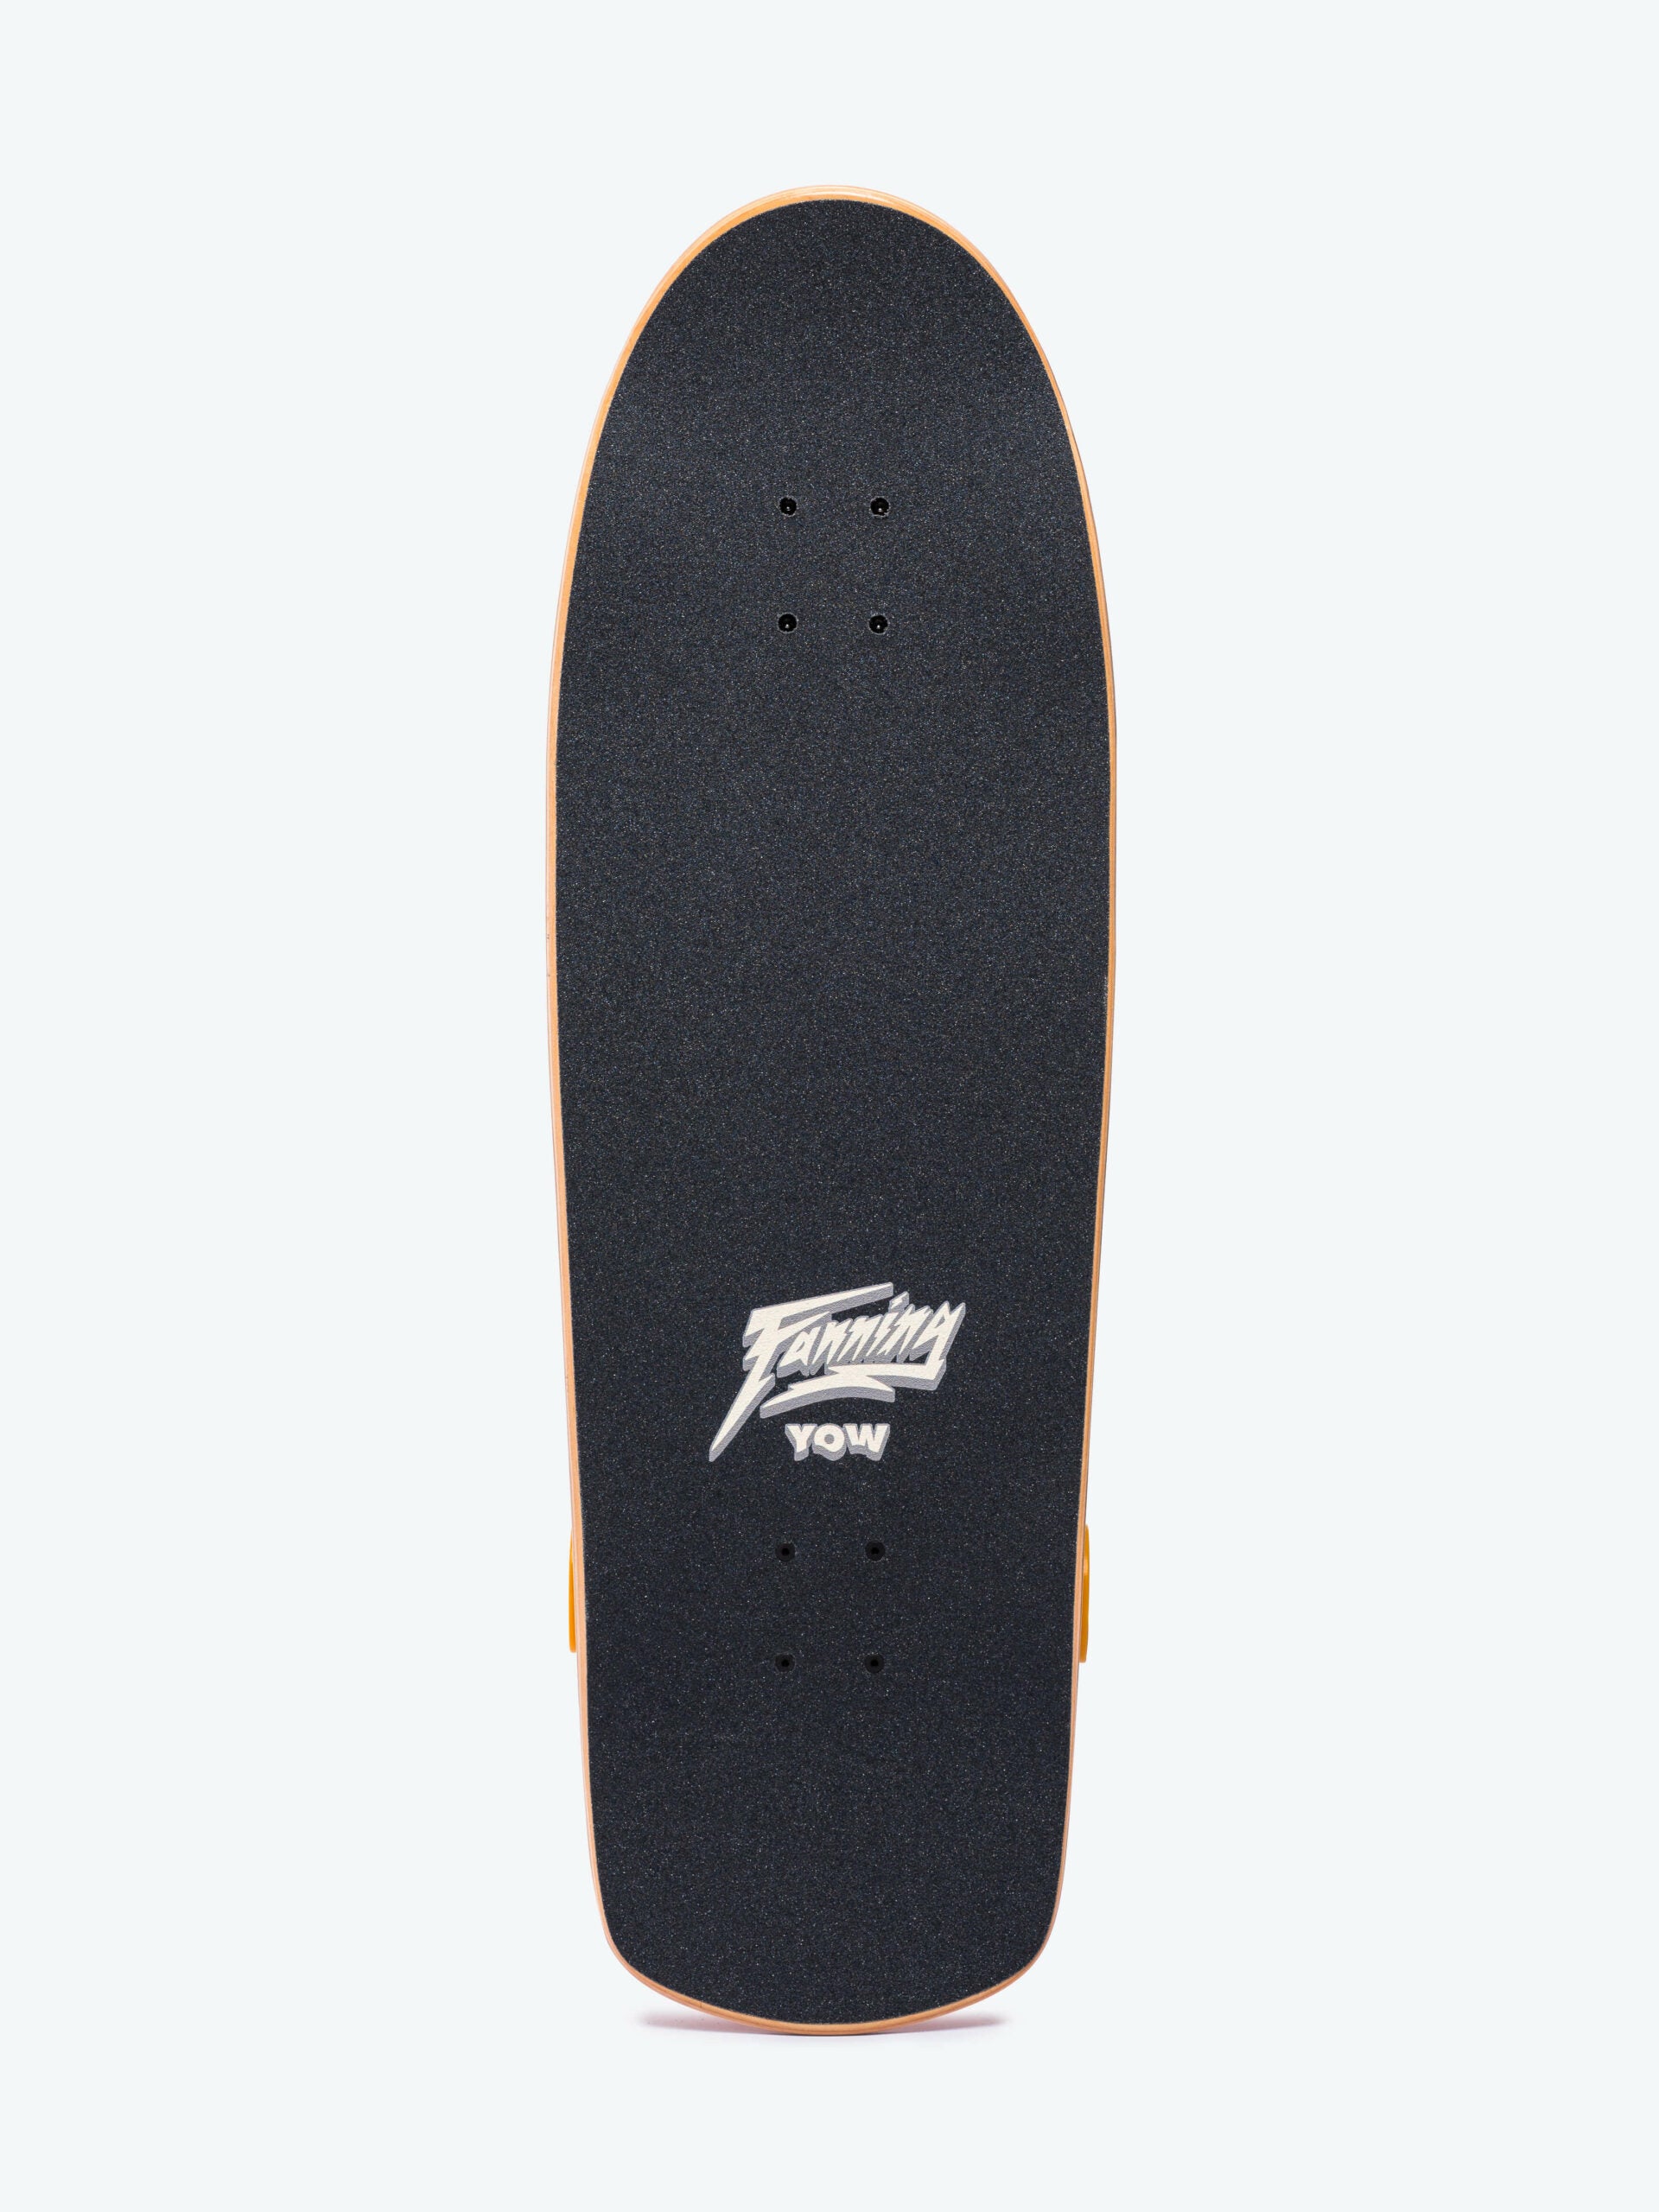 Surfskate Fanning Falcon Performer 33,5" Signature Series Yow